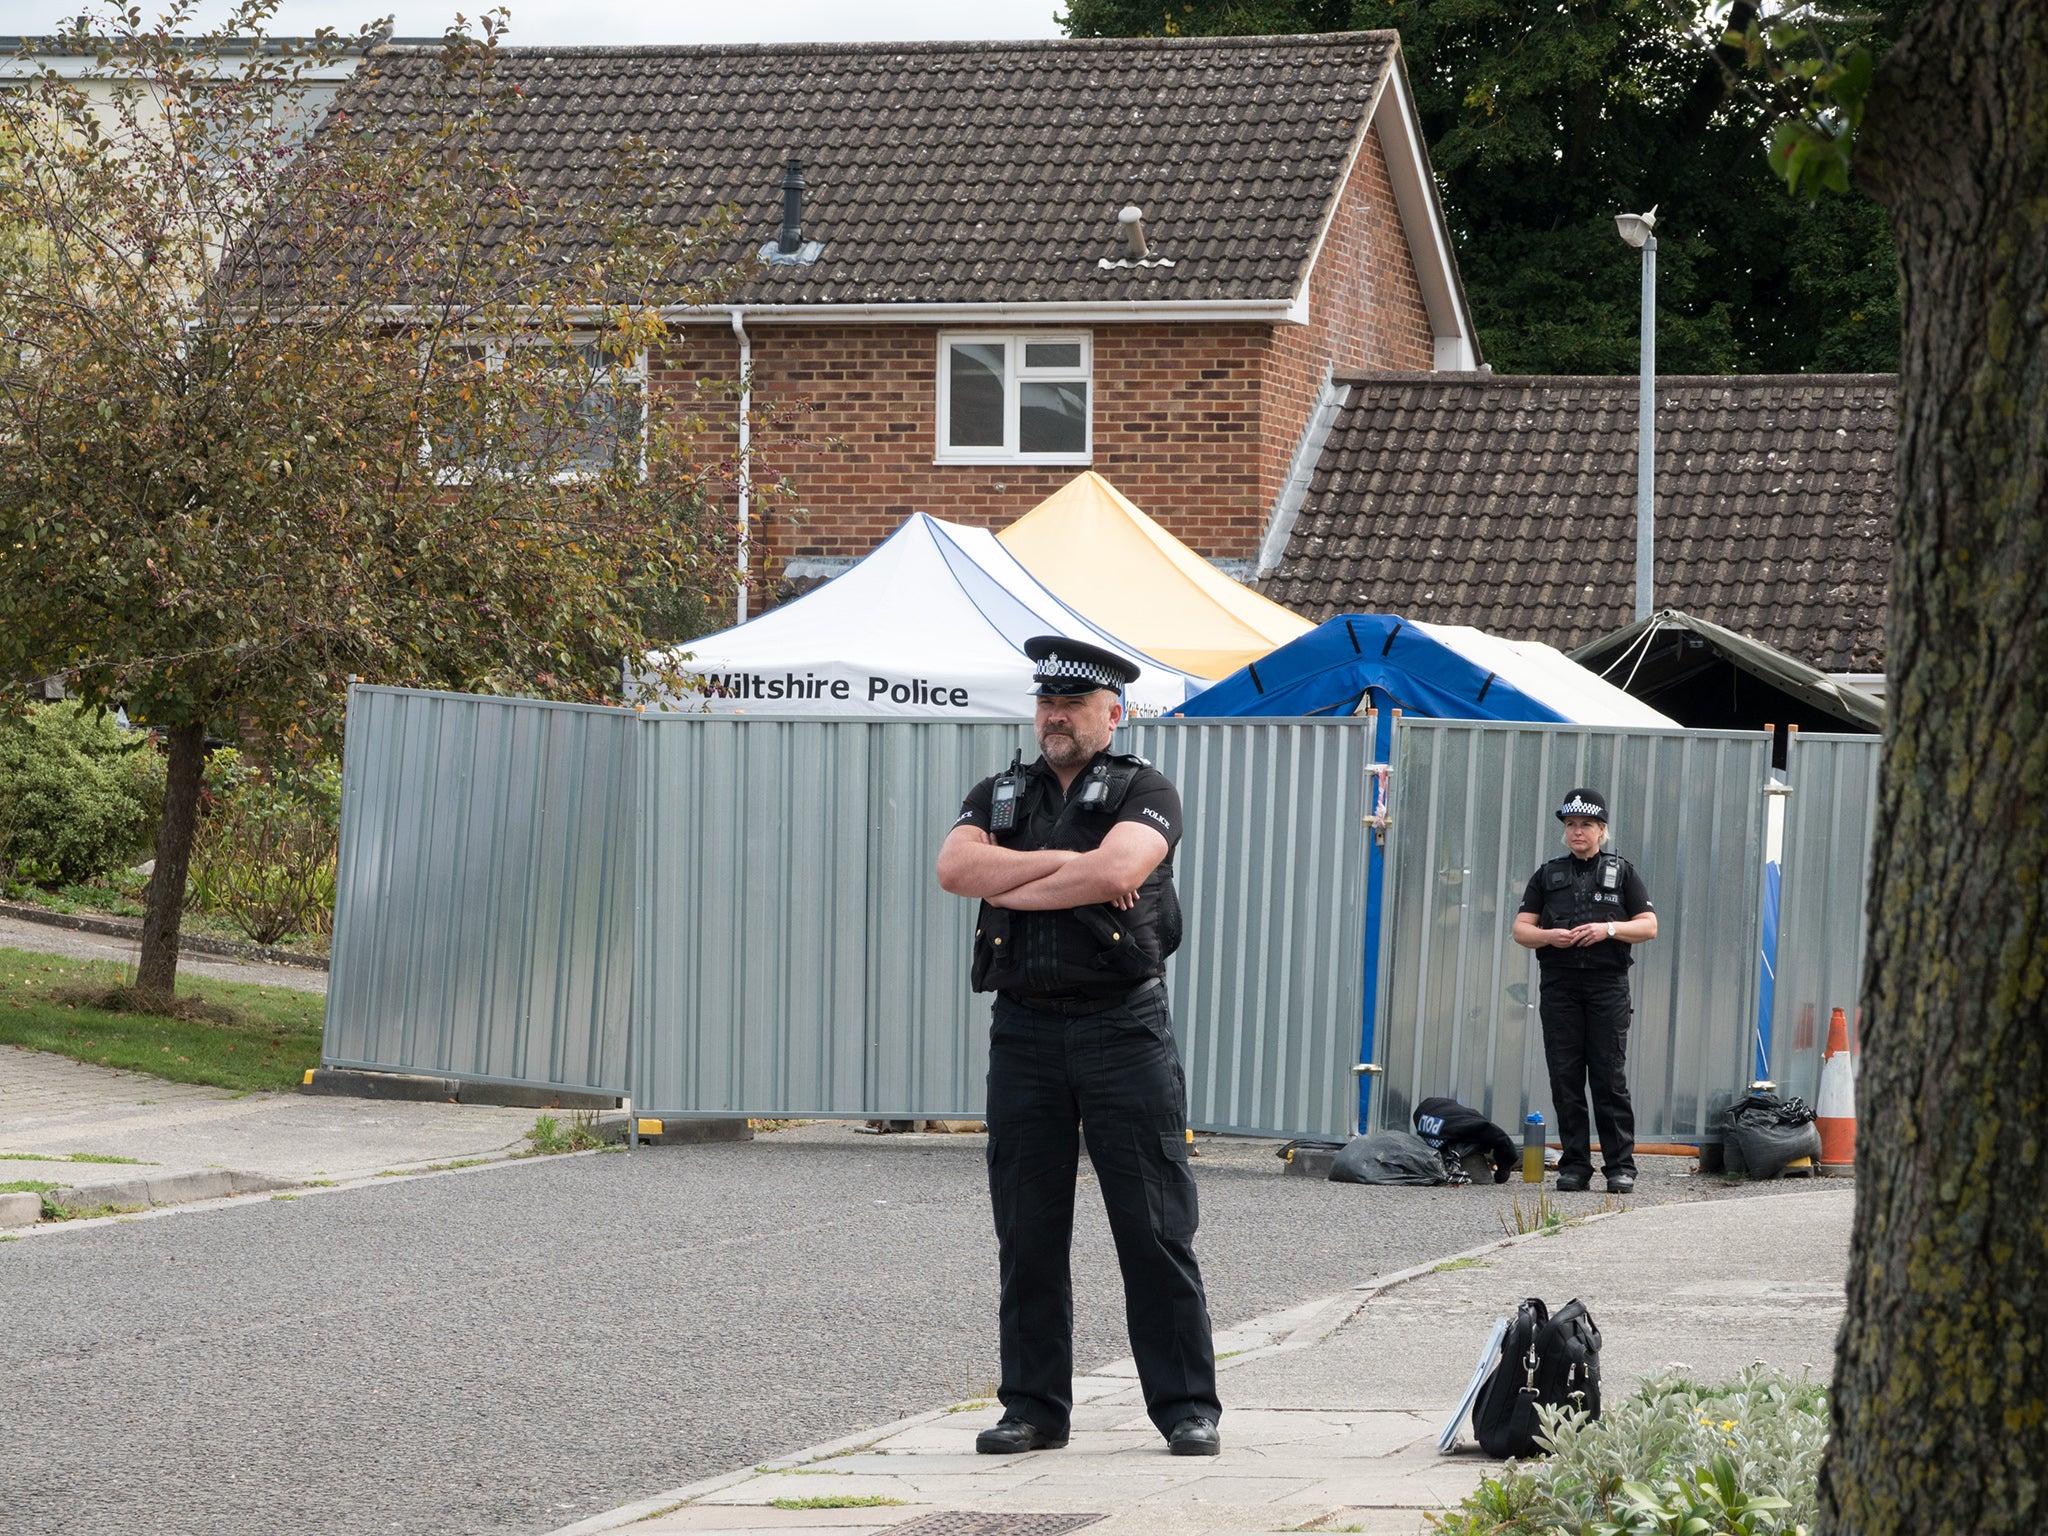 A cordon is in place so that police investigations or clean-up work can be carried out safely